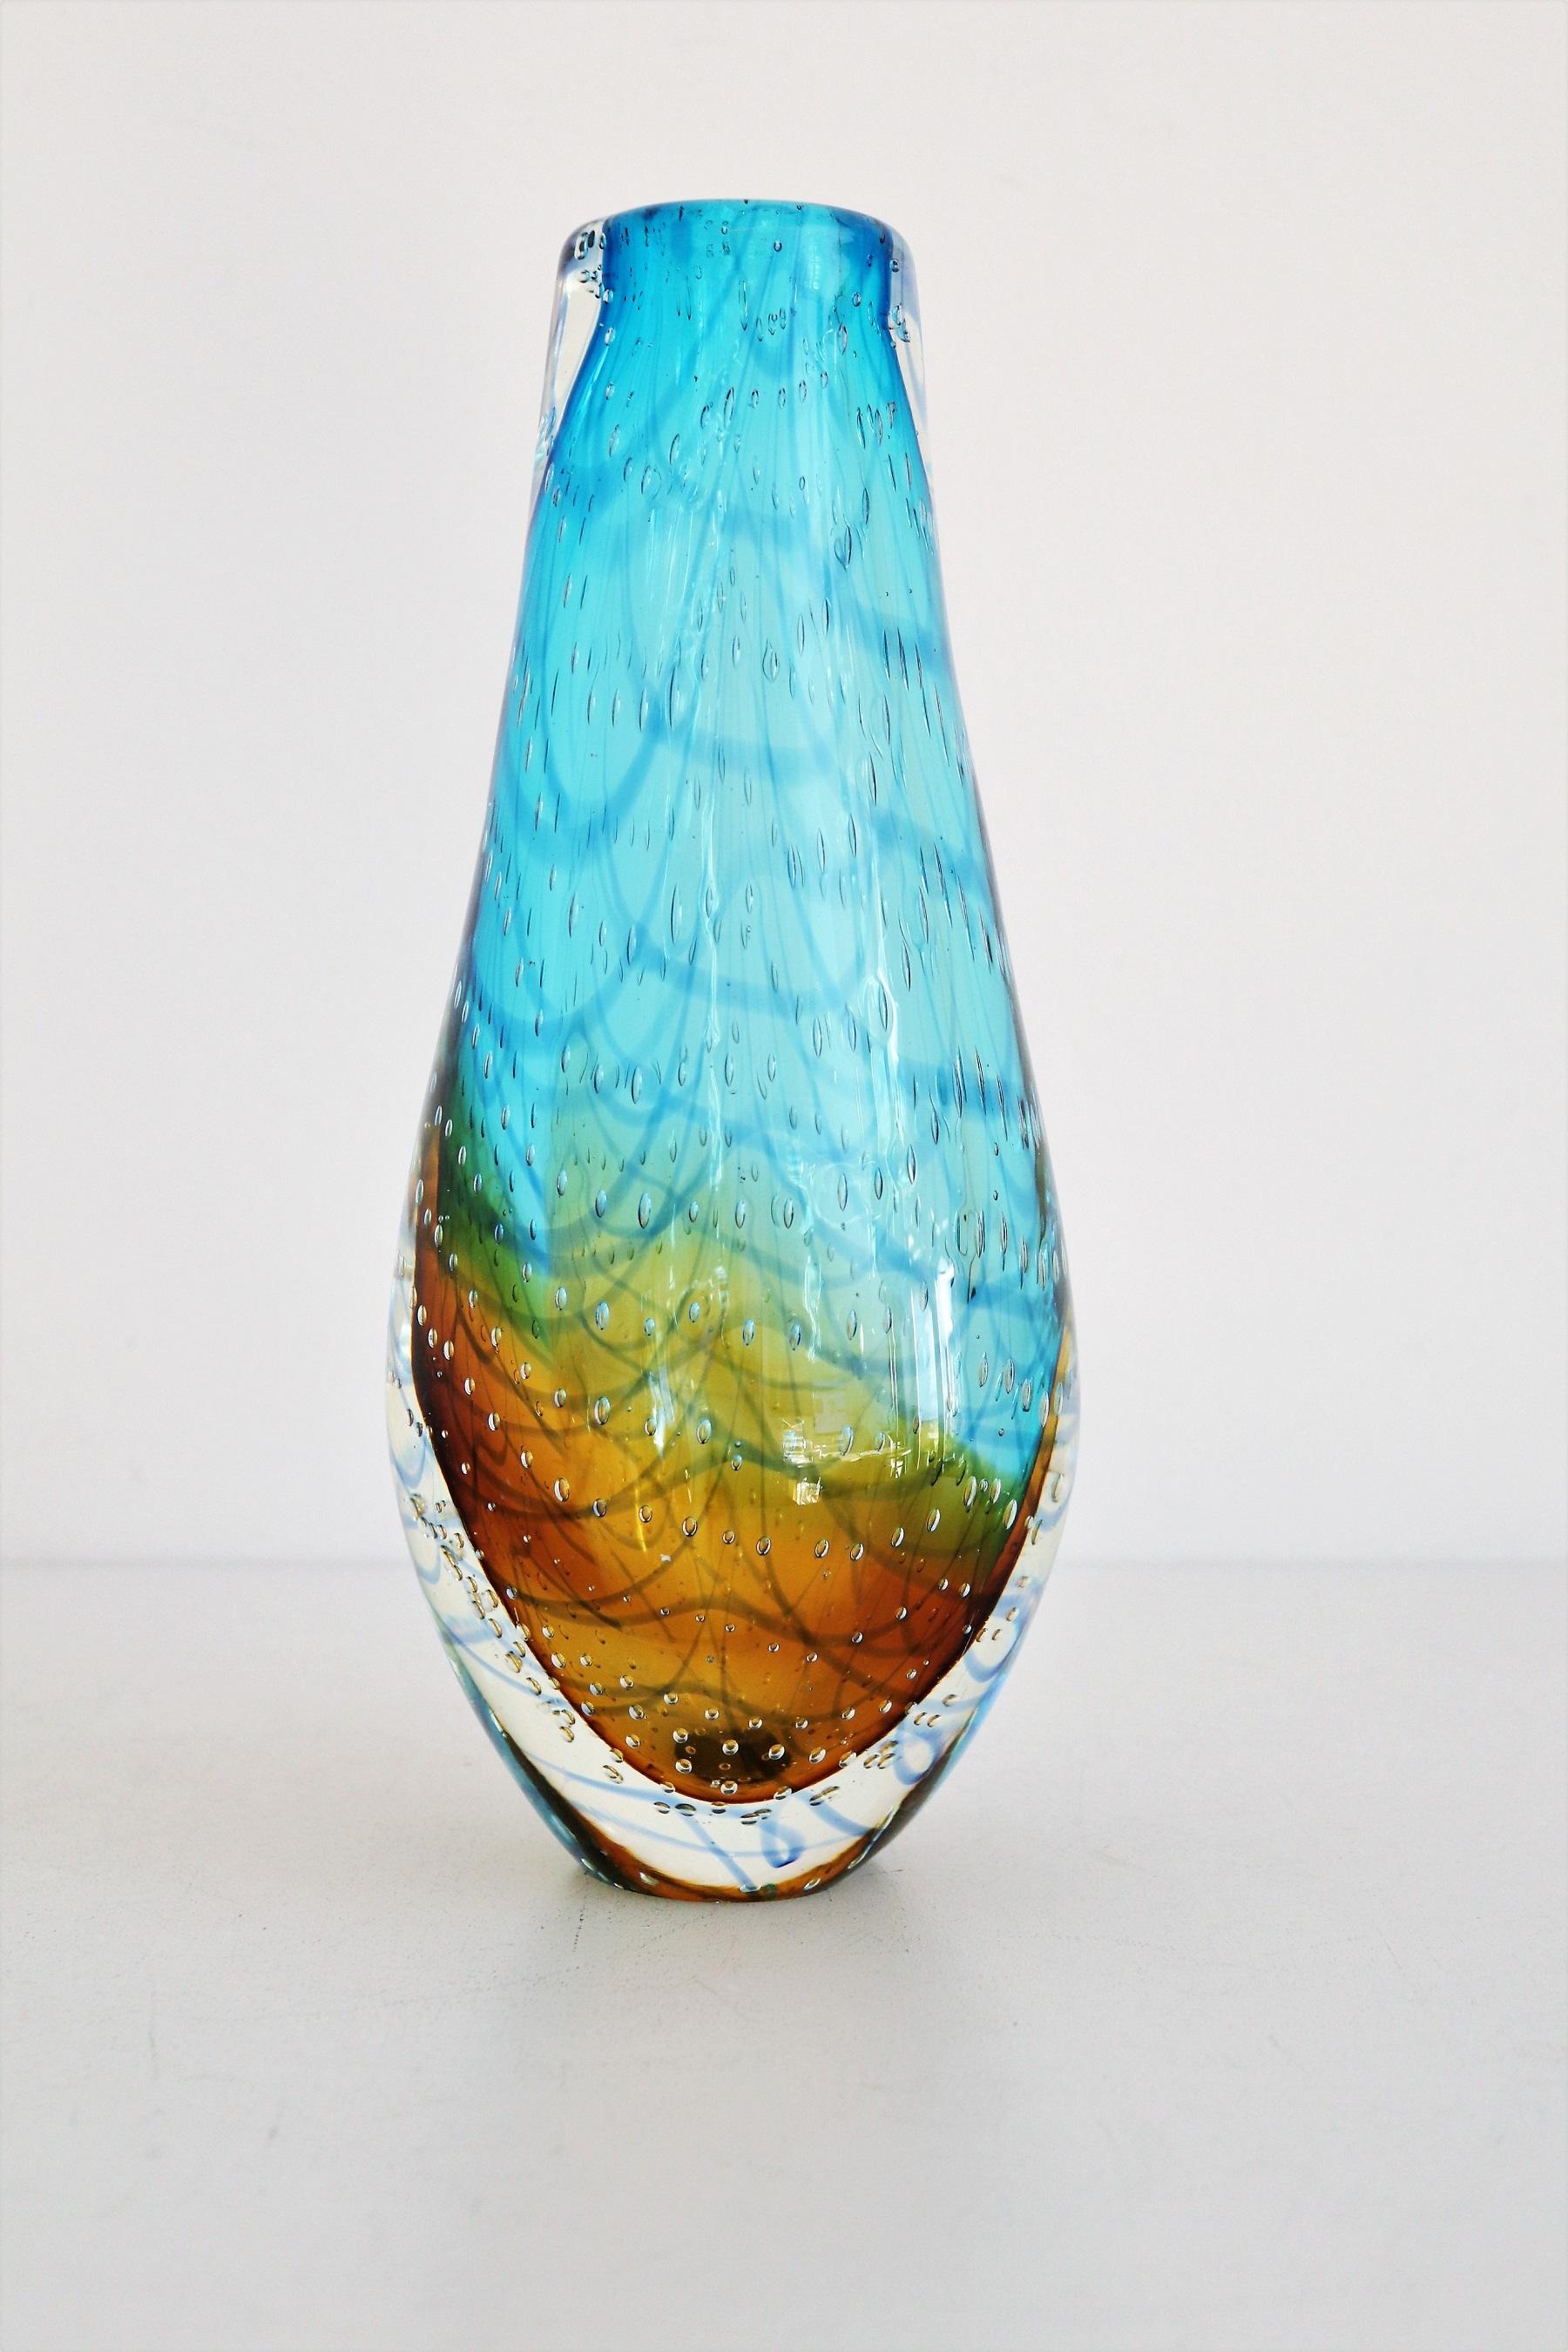 Gorgeous and big, heavy sommerso Murano glass vase, hand-crafted in Murano, Venice, Italy.
The vase is made in stunning shiny colors typically for Murano glass, and shows a wonderful play of colors and movements within the glass.
No limescale